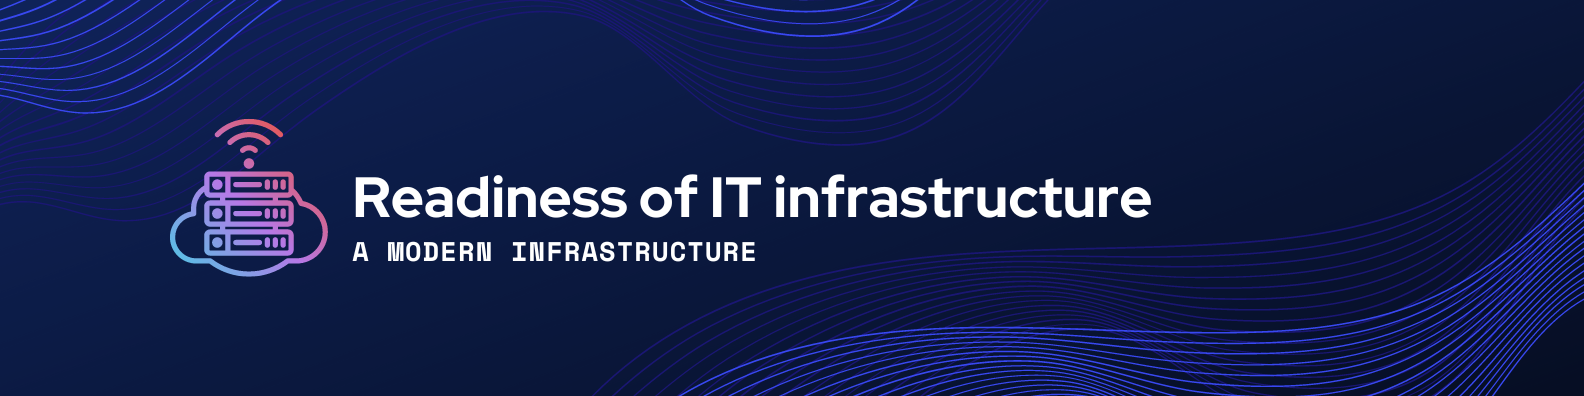 Readiness of IT infrastructure